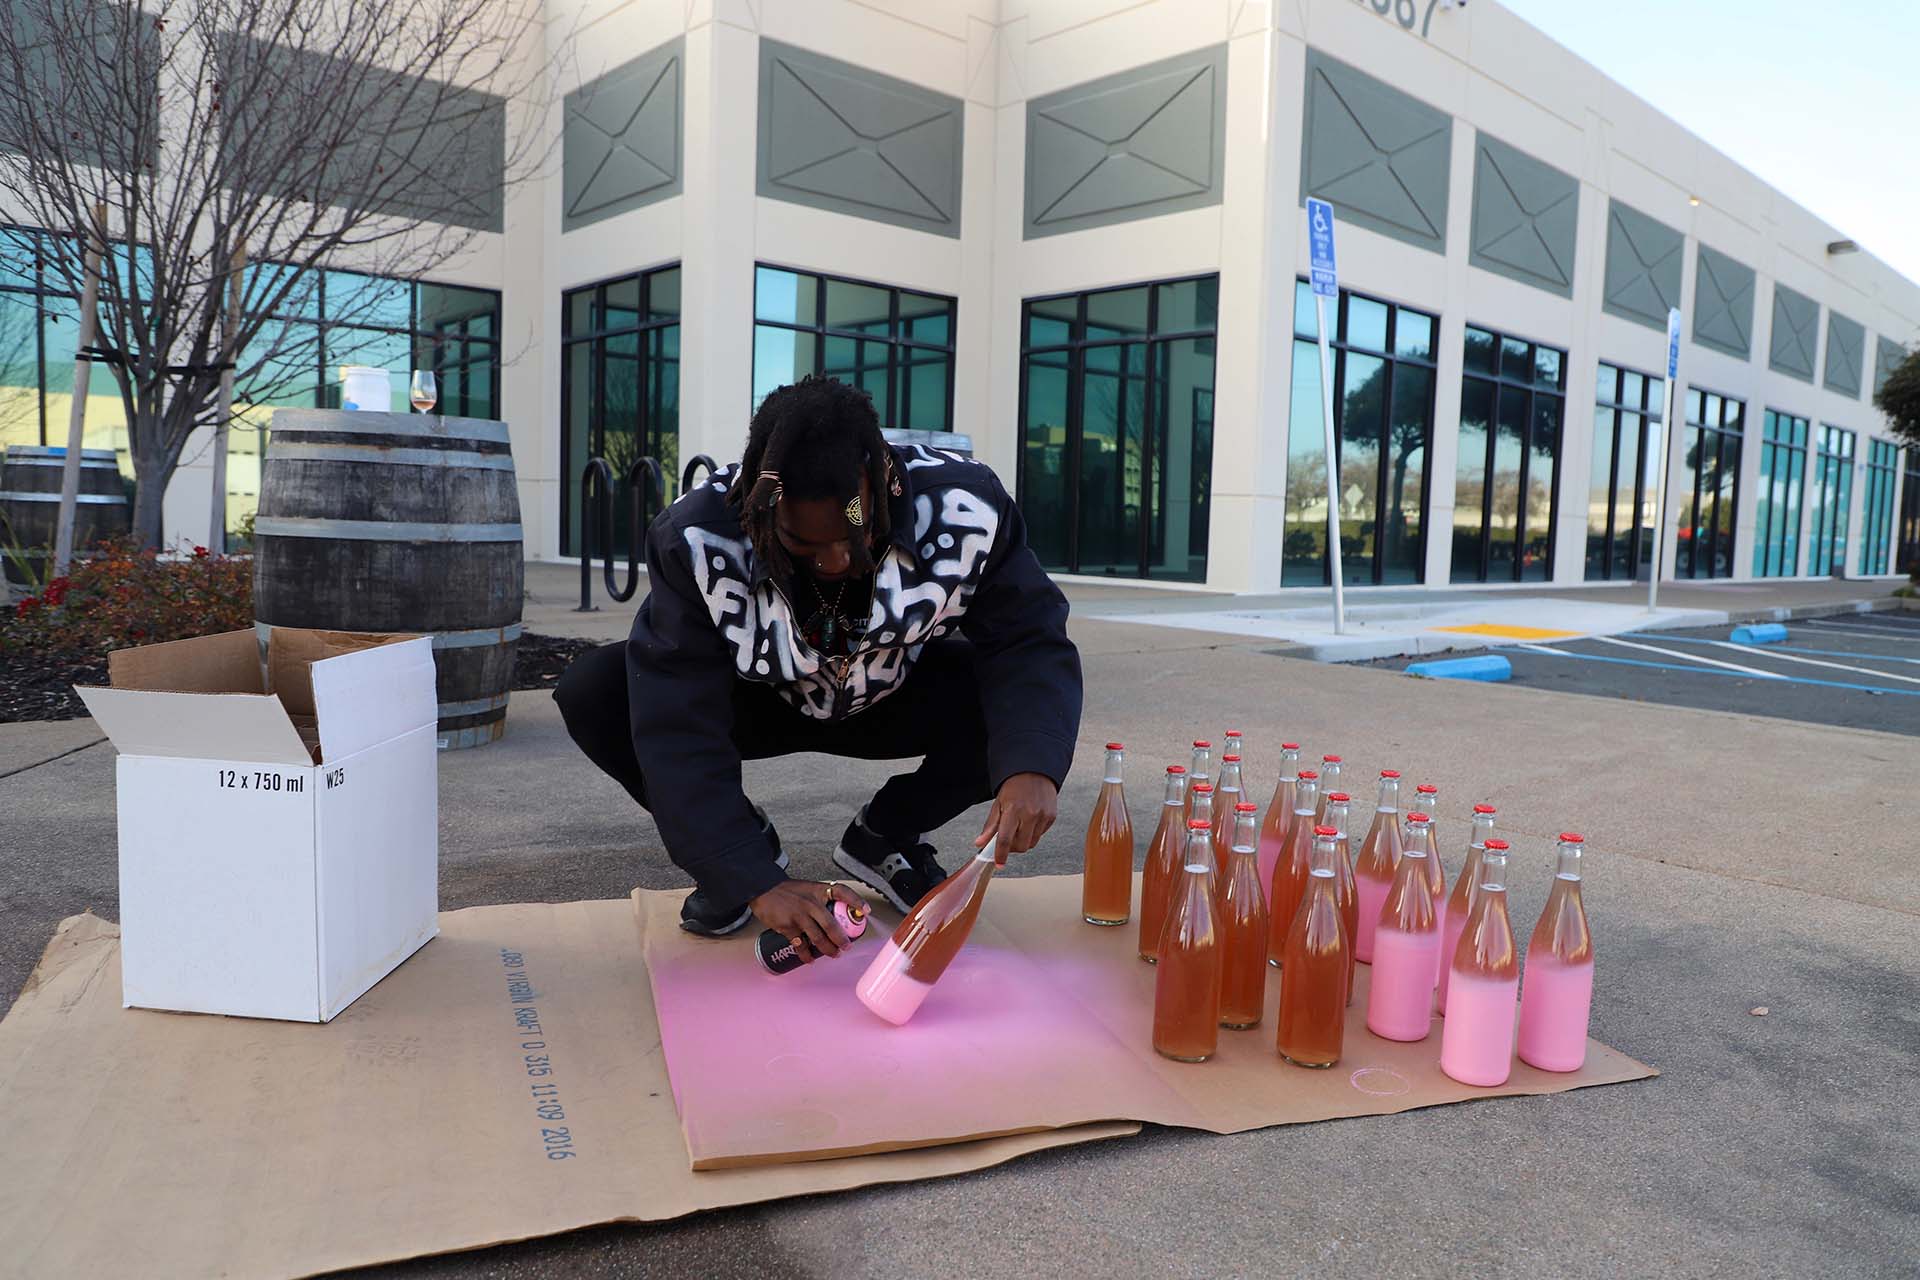 A man crouches down to paint a wine bottle with a can of pink spray paint.